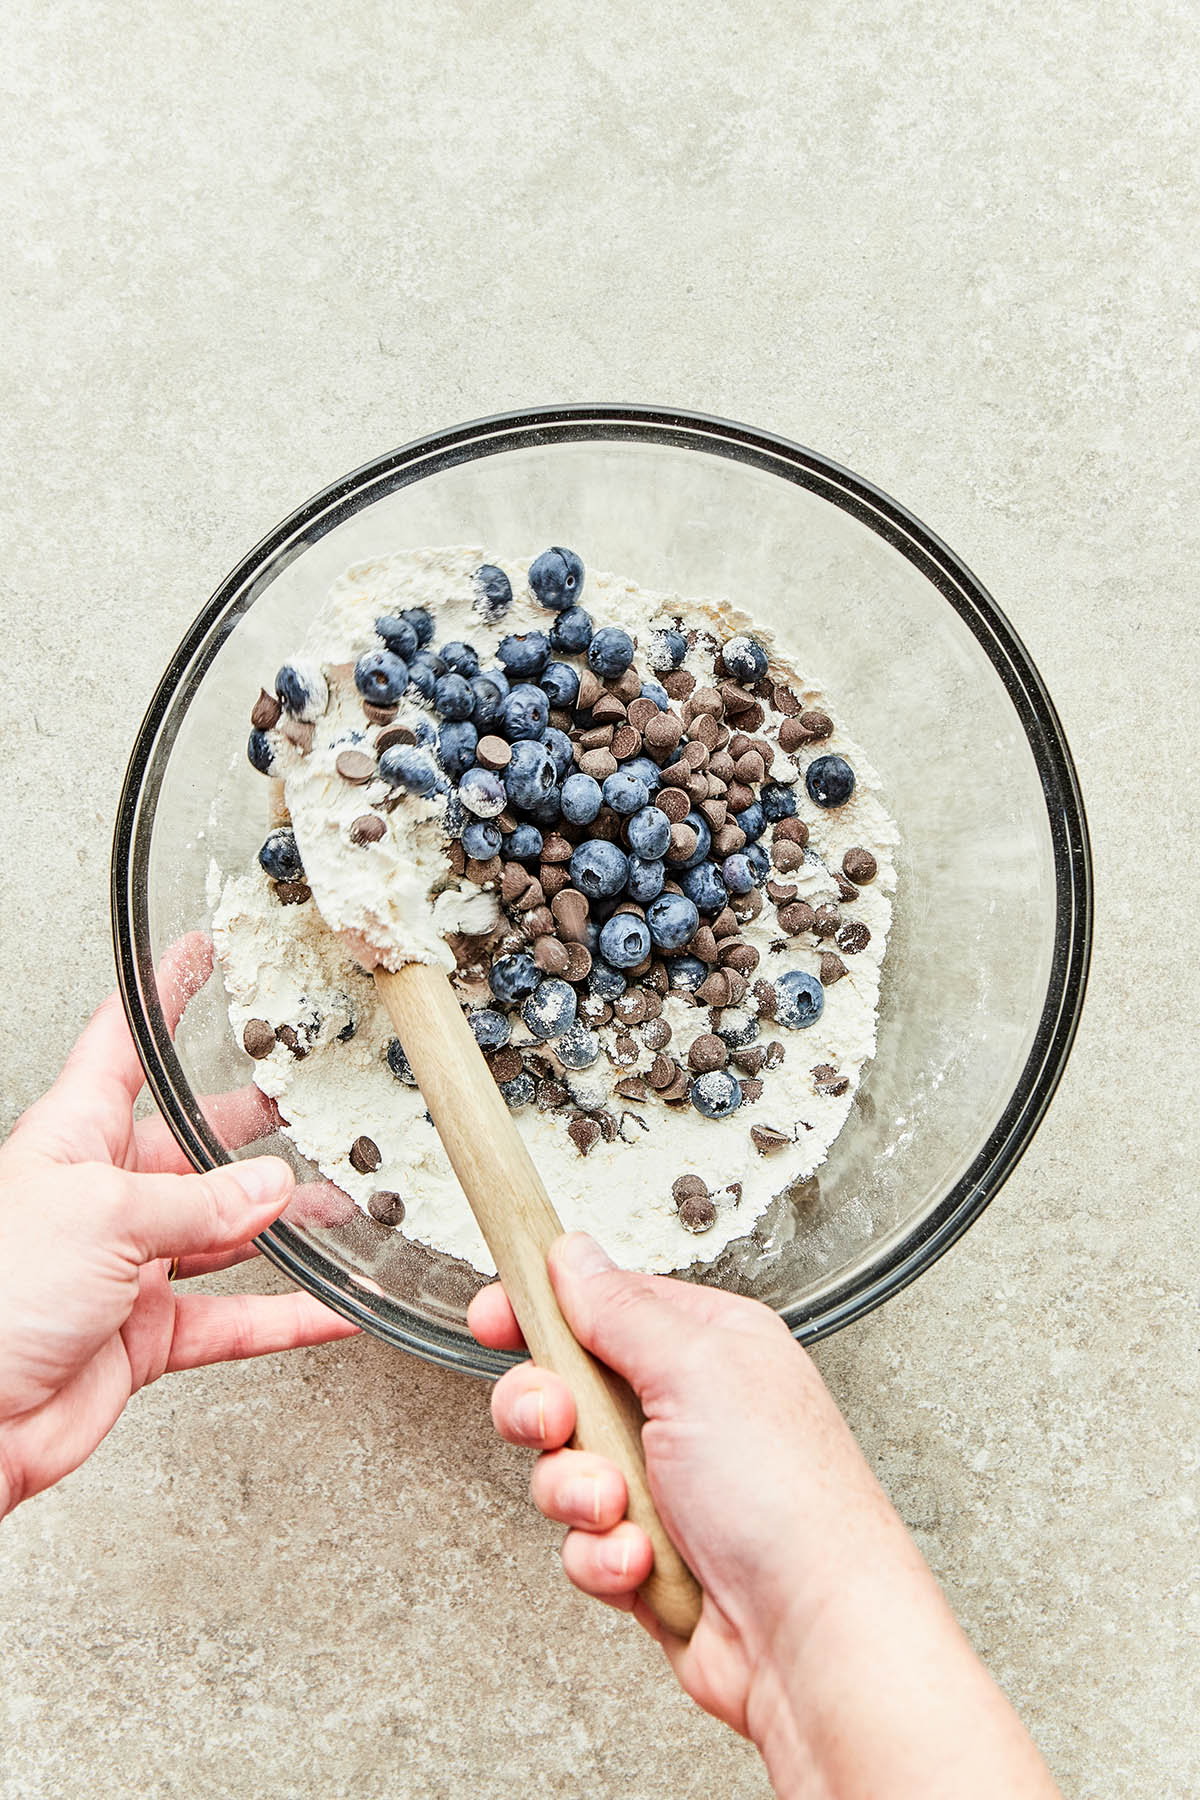 A hand using a rubber spatula to fold chocolate chips and blueberries into a bowl of dry ingredients.